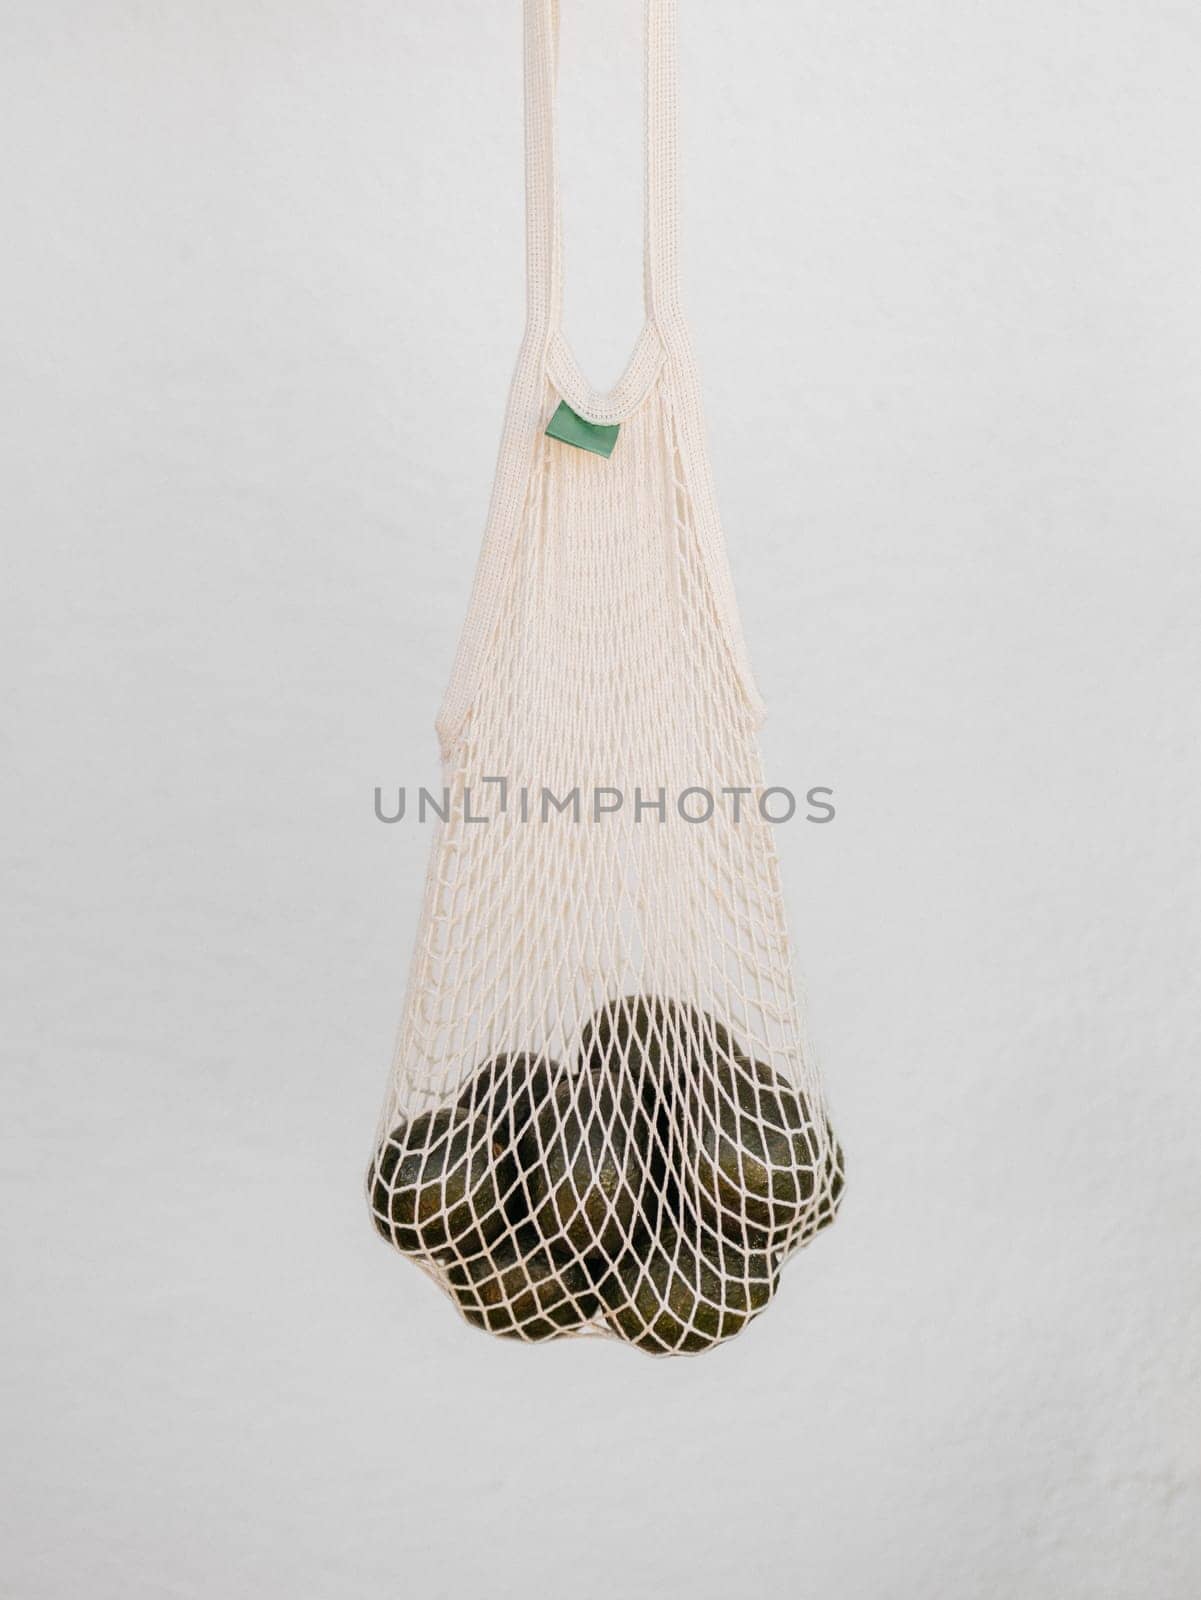 A Net Bag Filled With A Bunch Of avocado on white background by apavlin